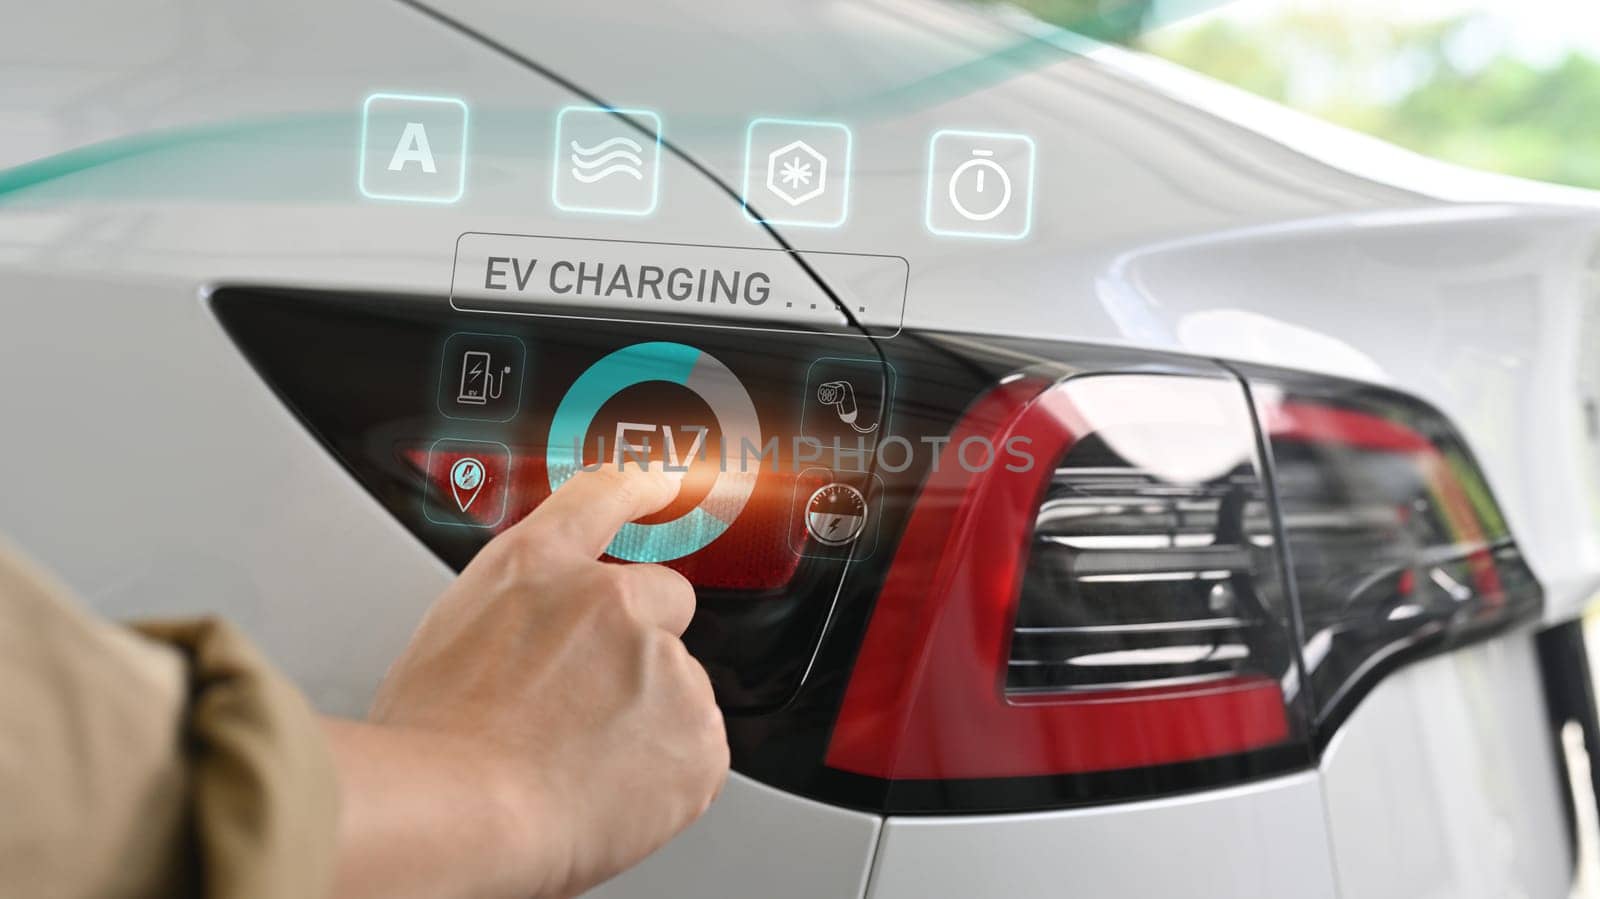 Cropped unrecognizable person hand opening a socket cap to preparing to charge an electric car by prathanchorruangsak